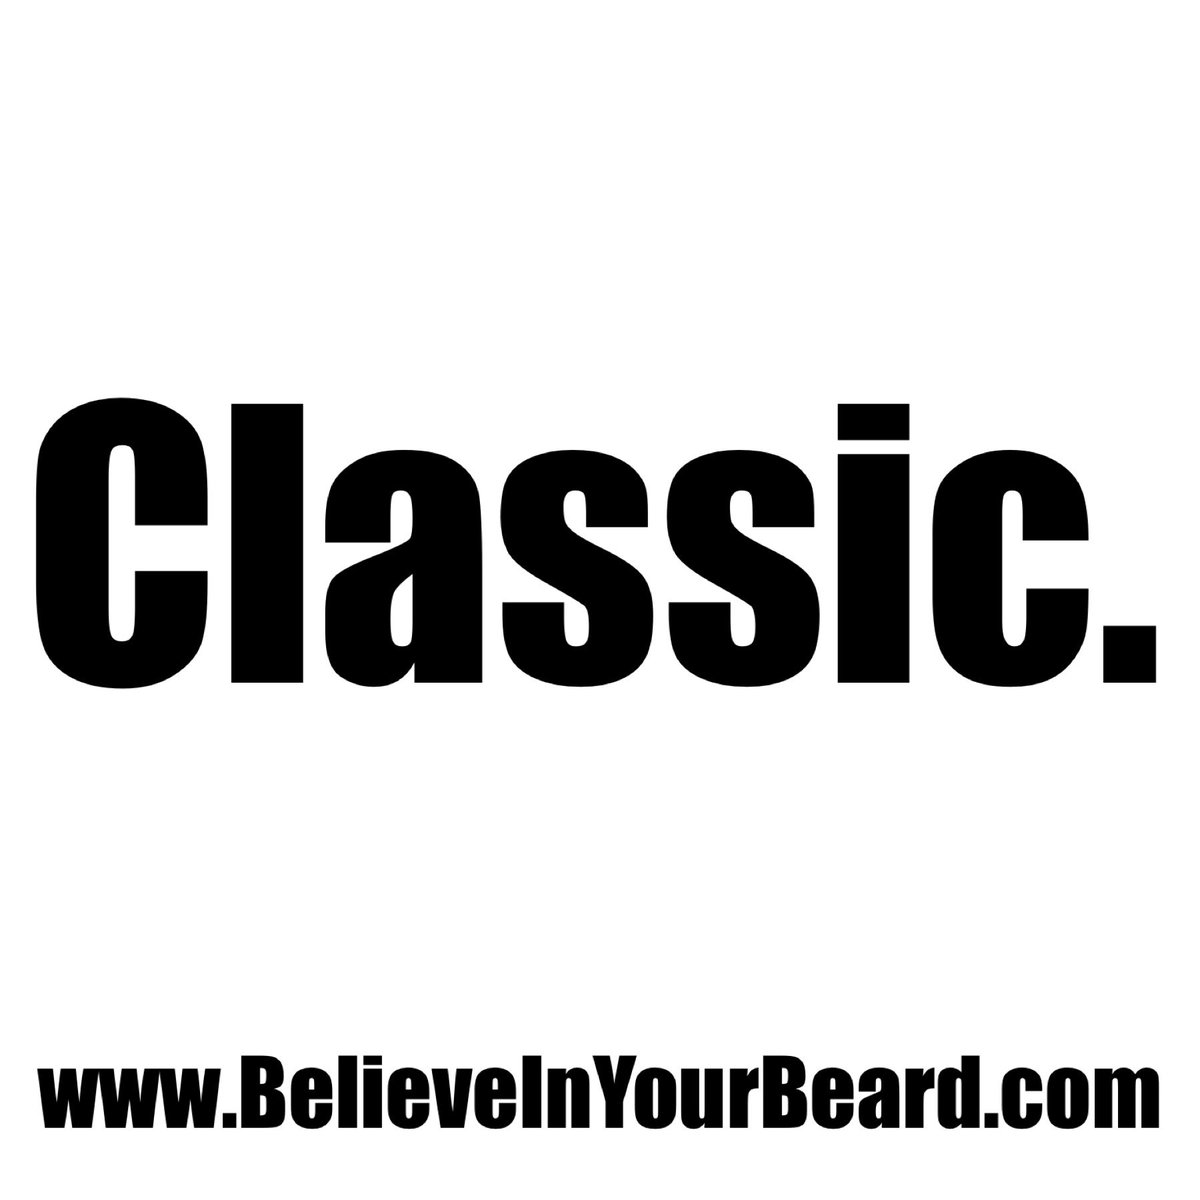 BIYB. Products designed to complement your LifeStyle. For more information visit BelieveInYourBeard.com.

#WELCOMEtoBIYB #WELCOMEtoTheLIFESTYLE #BIYB #shopBIYB #BELIEVEinyourBeard #BeardCare #LifeStyle #Brand #KansasCity #LOVE #MADEwithLOVEfromKANSASCITY